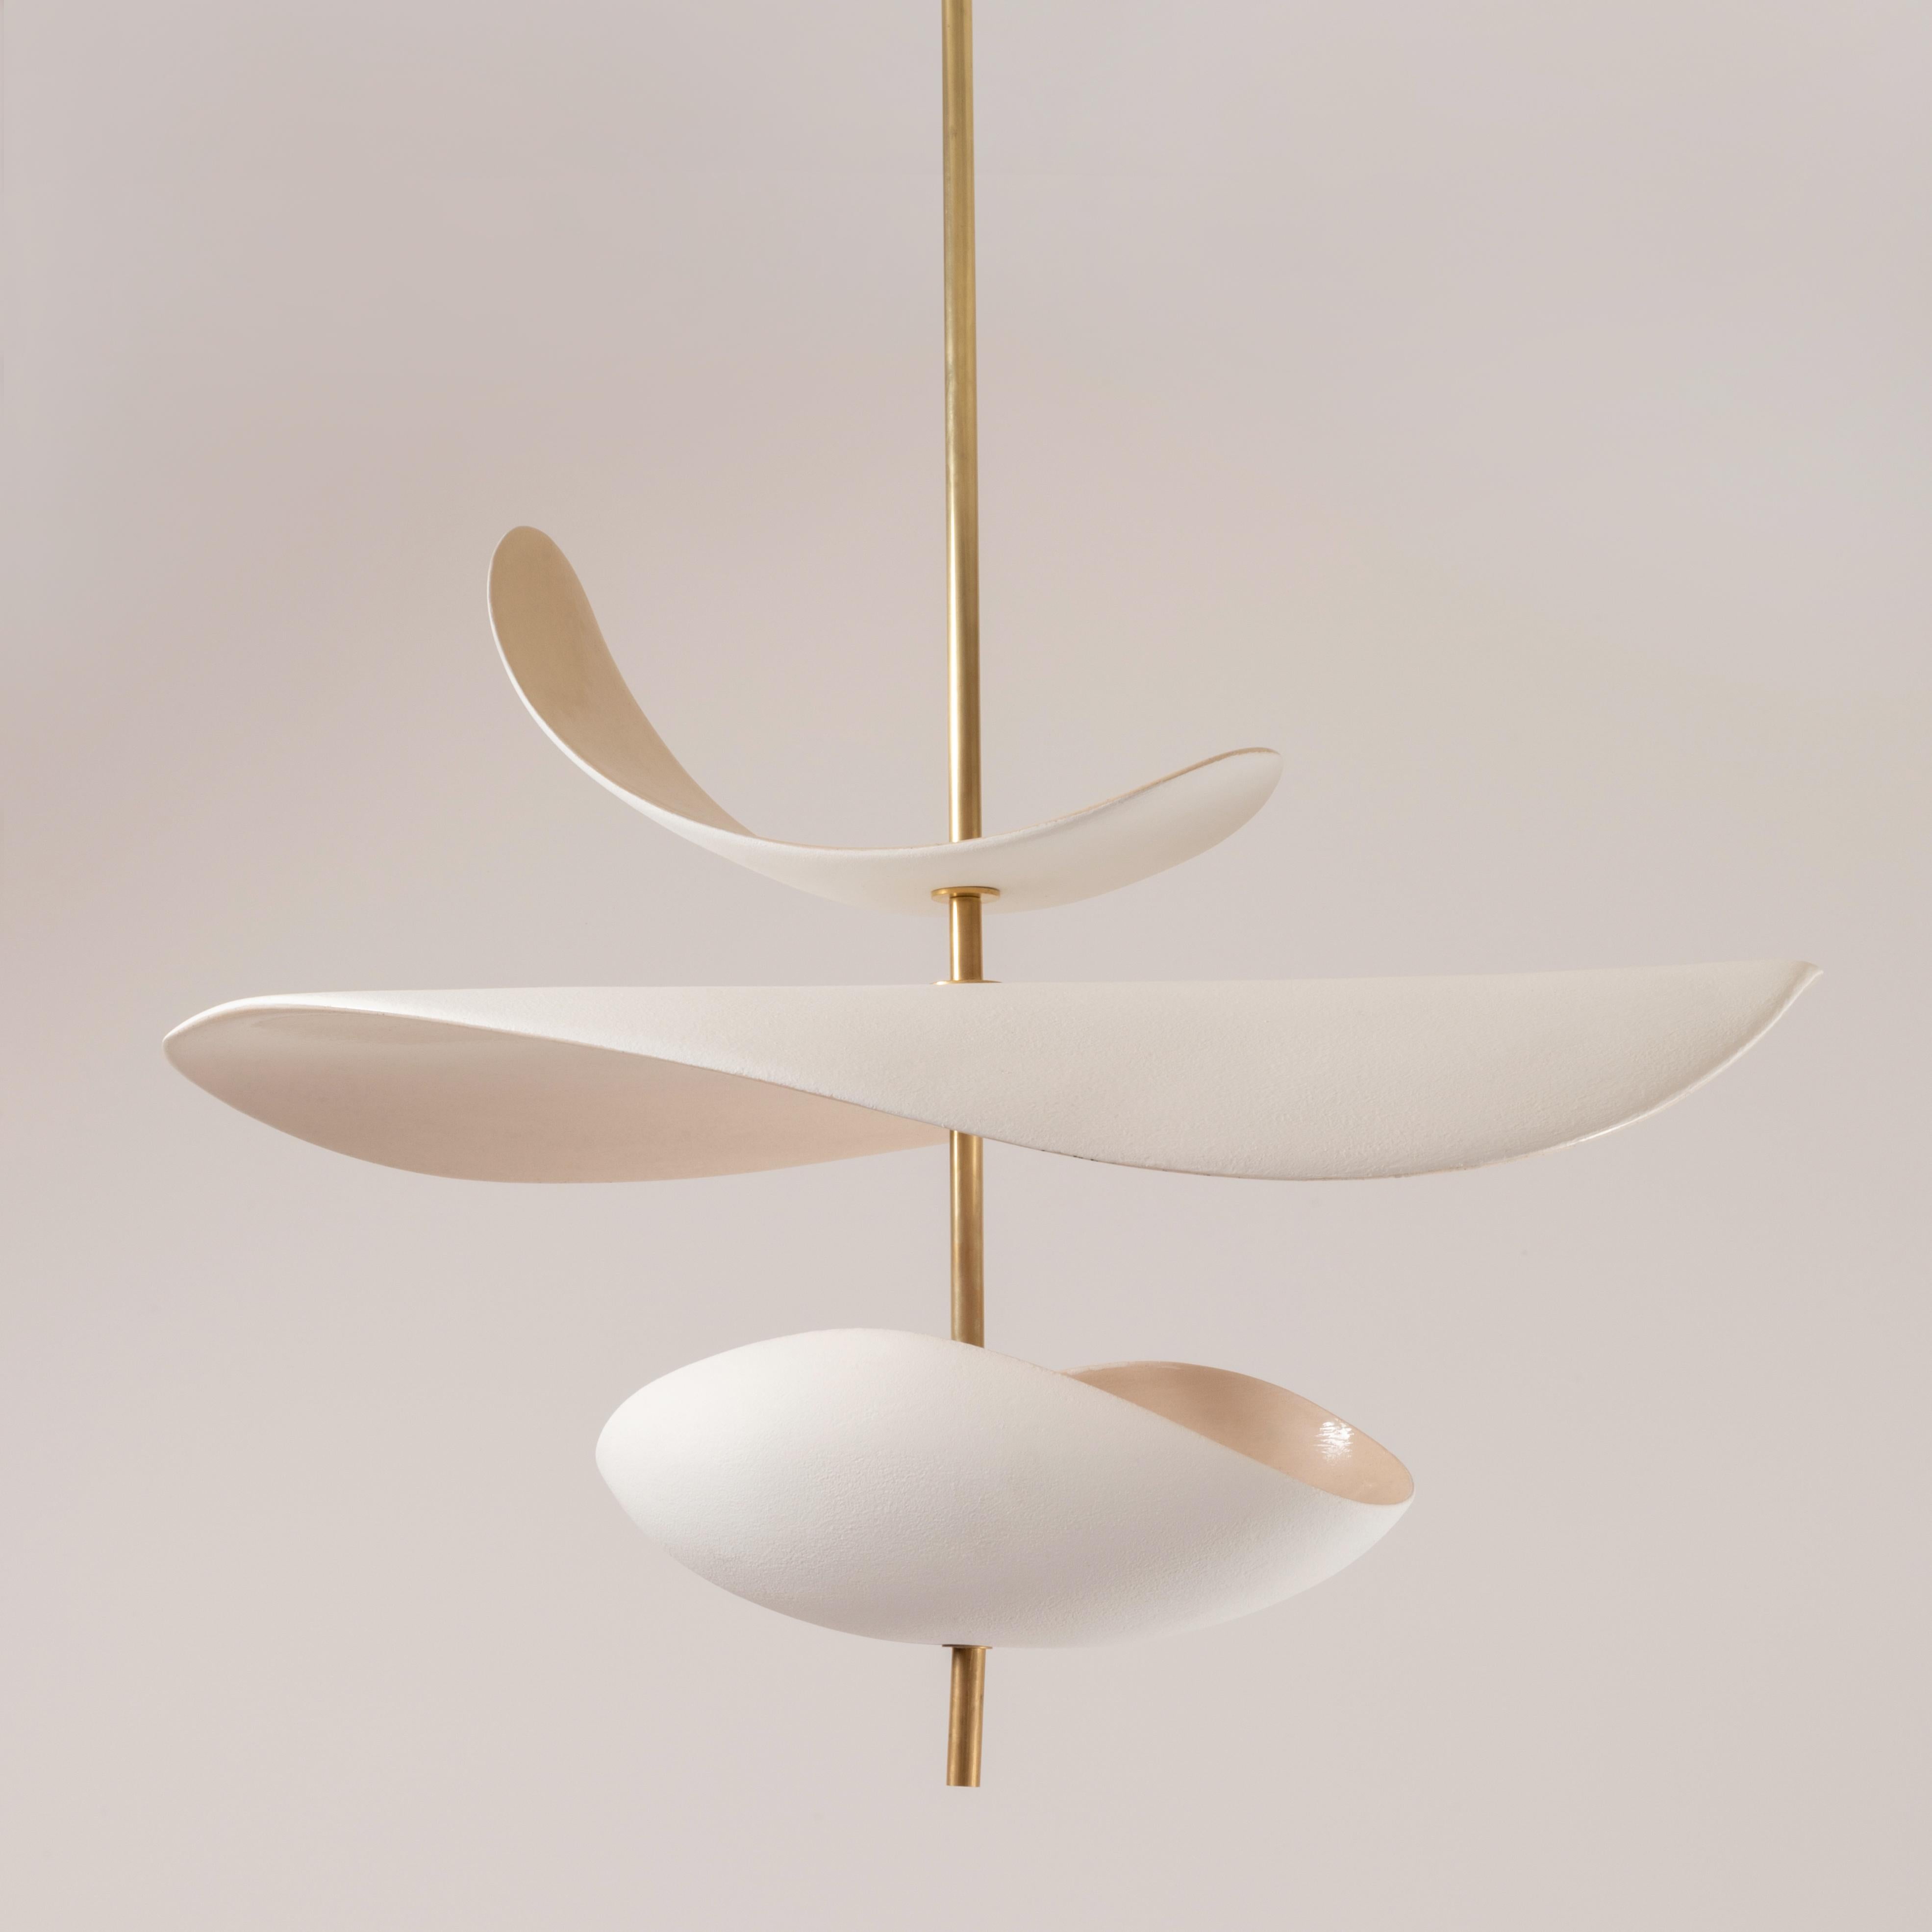 Free form B pendant by Elsa Foulon
Standard size
Dimensions: D 55-60 cm 
Materials: ceramic, brass
Unique Piece
Also available in different options: bowl or cup (lower part).
The height is min 65 cm and customizable to the customer's size.